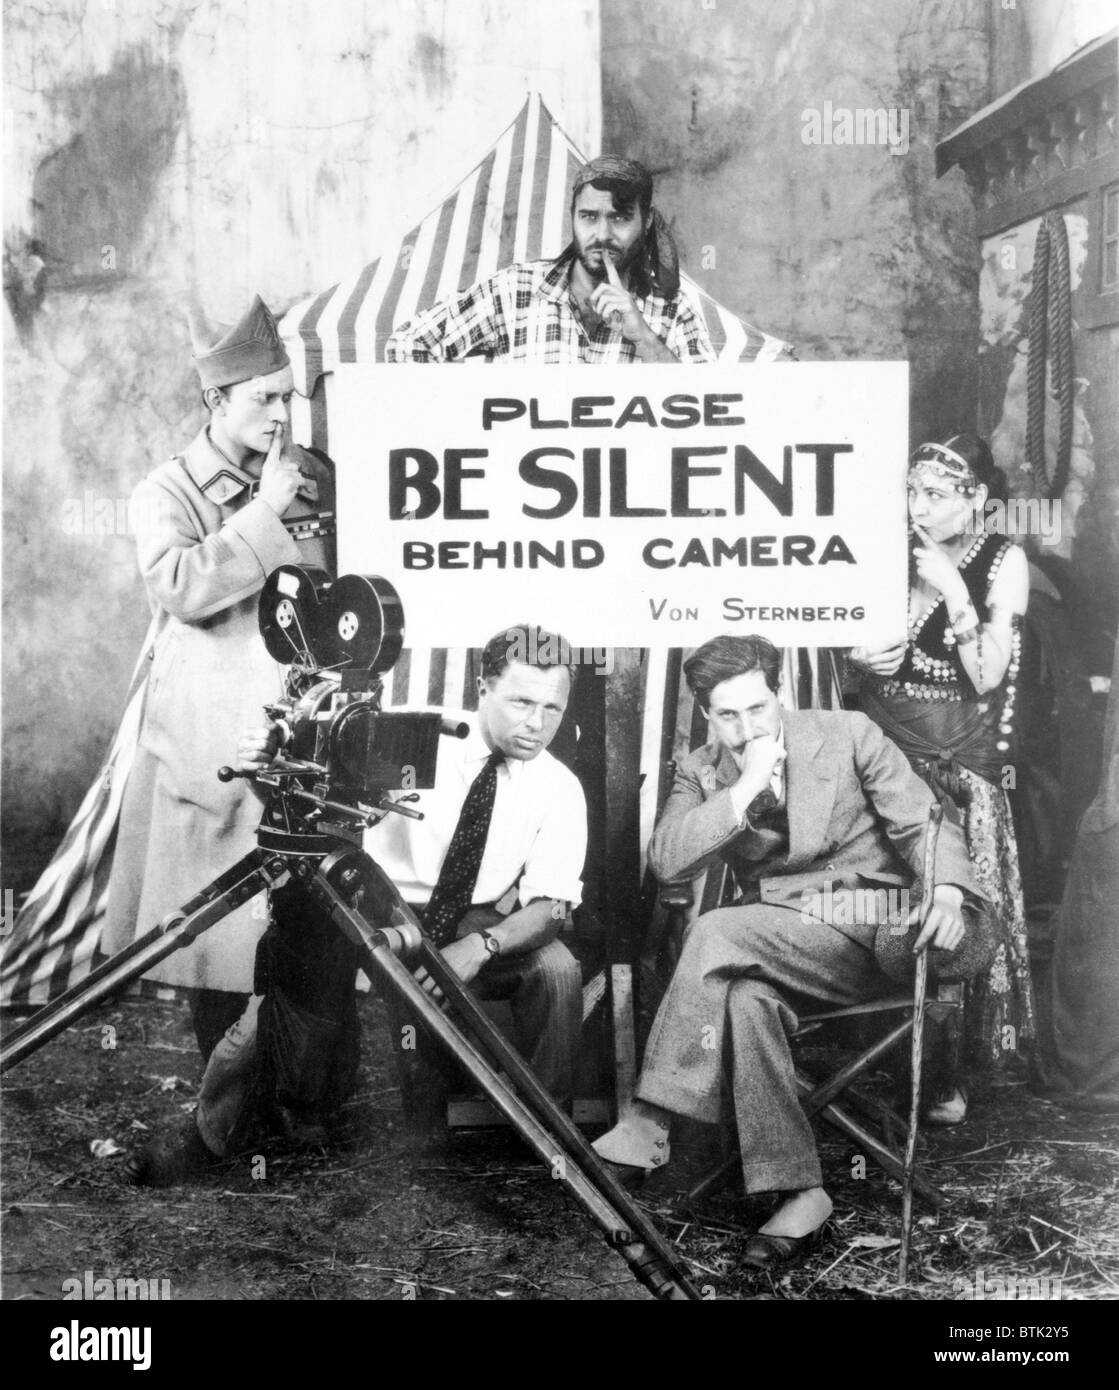 Josef von Sternberg during the shooting of MGM's silent film, EXQUISTE SINNER in 1926. Conrad Nagel (left), Matthew Betz (behind sign) and Renee Adoree pose for a gag shot behind cameraman Maximilian Fabian and von Sternberg. Stock Photo